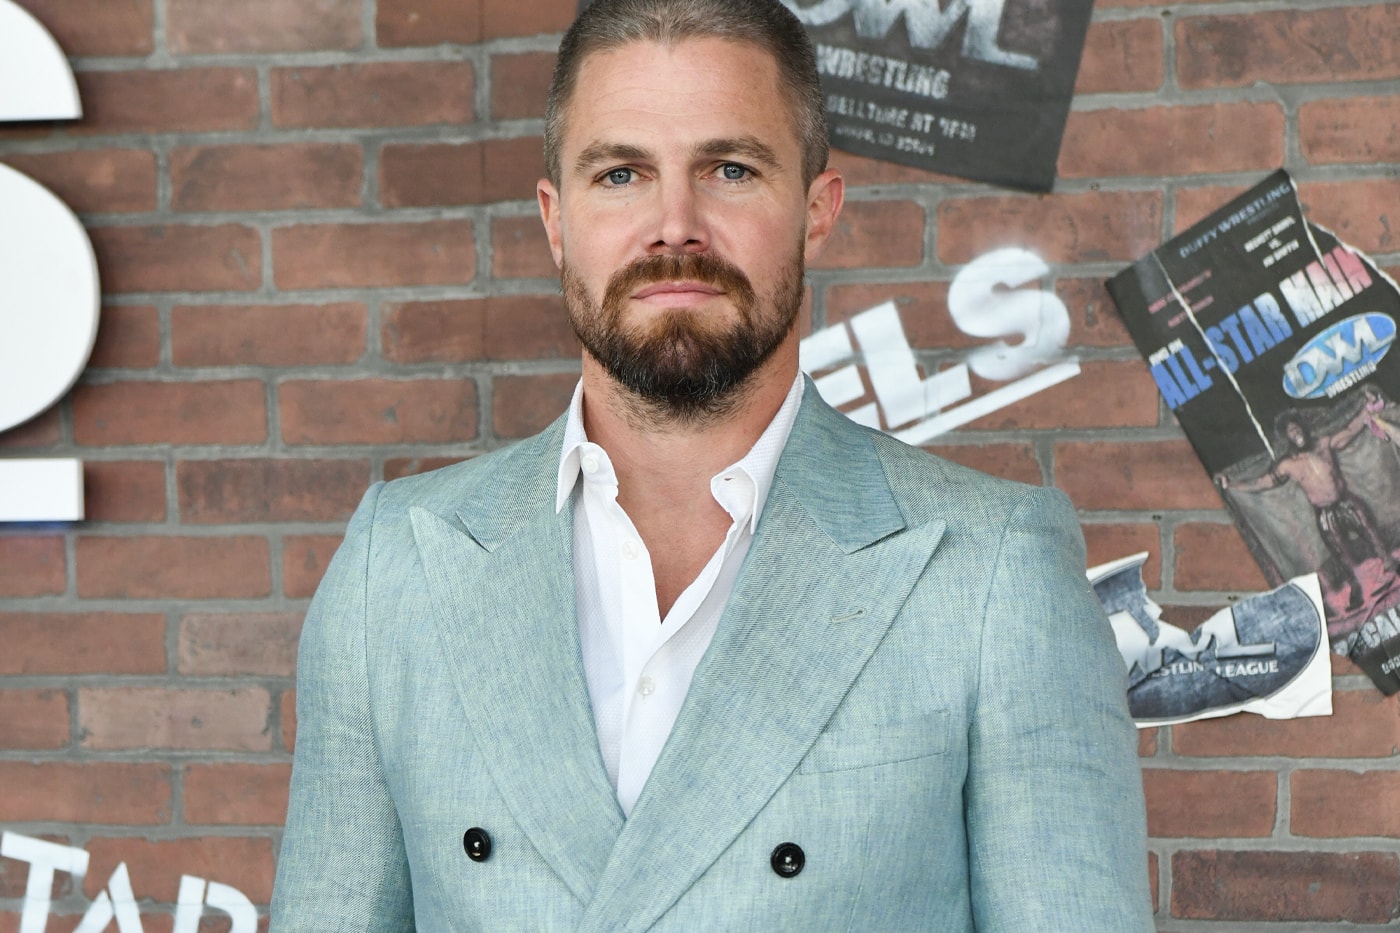 Stephen Amell To Lead 'Suits' Spinoff 'Suits: LA' law series lawyers ted black nbc upcoming spinoff usa networks patrick j adams gabreil macht rich hoffman meghan markle gina torres 